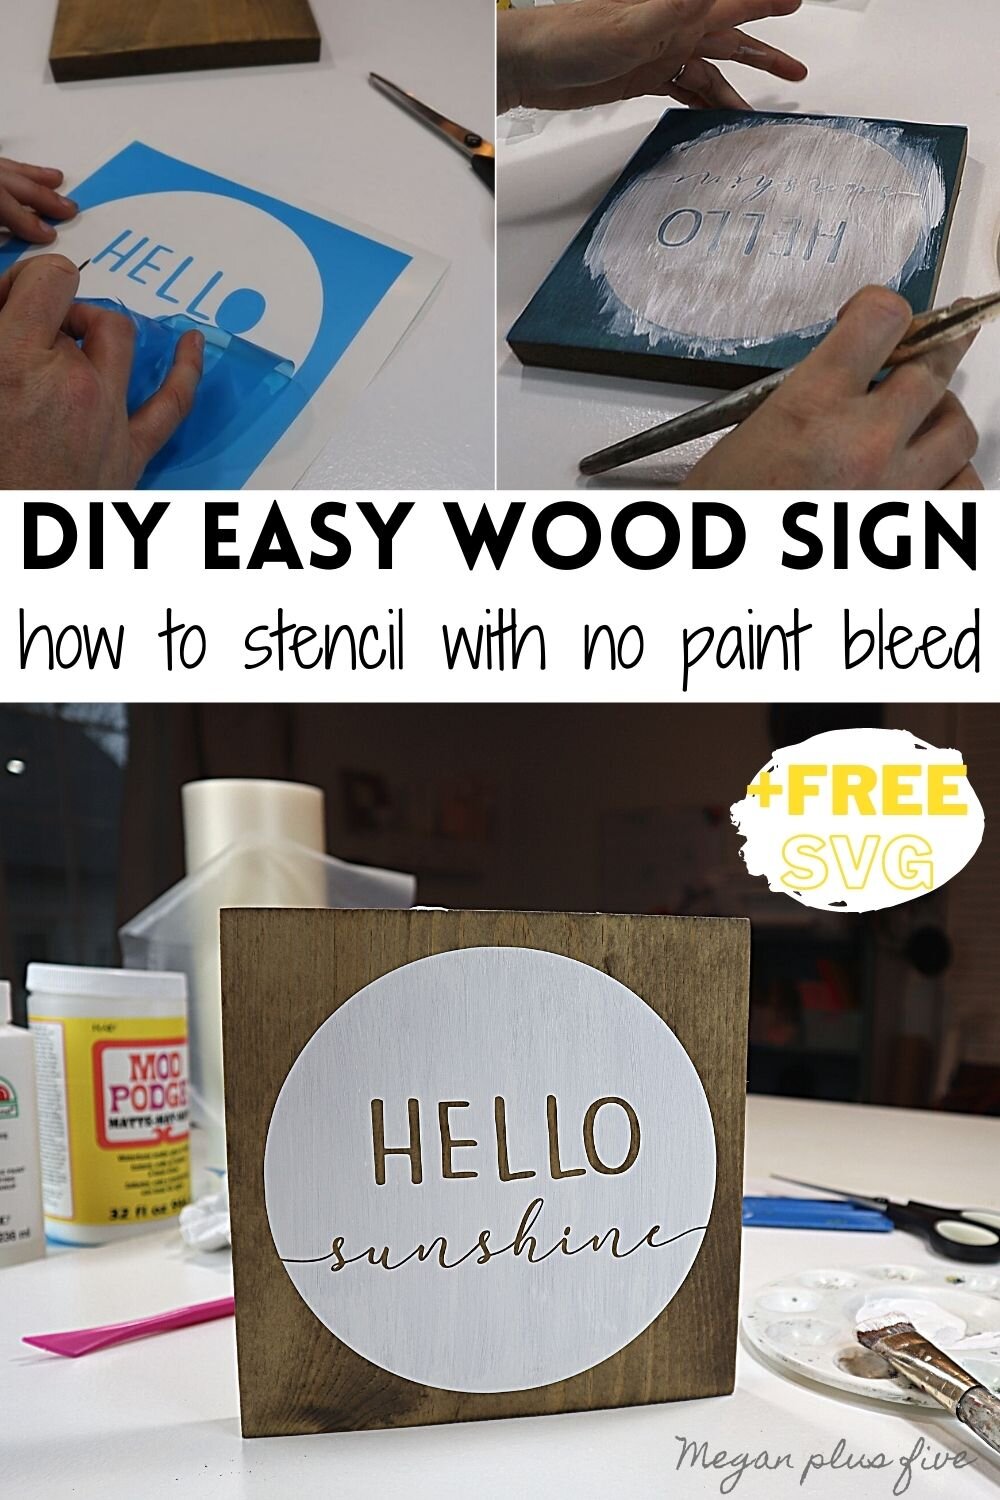 DIY how to stencil on wood sign painting tutorial. How to make a hello sunshine lettered sign for summer. Using oramask stencil film to paint wood signs without paint bleed. free svg to use with cricut for sign making.